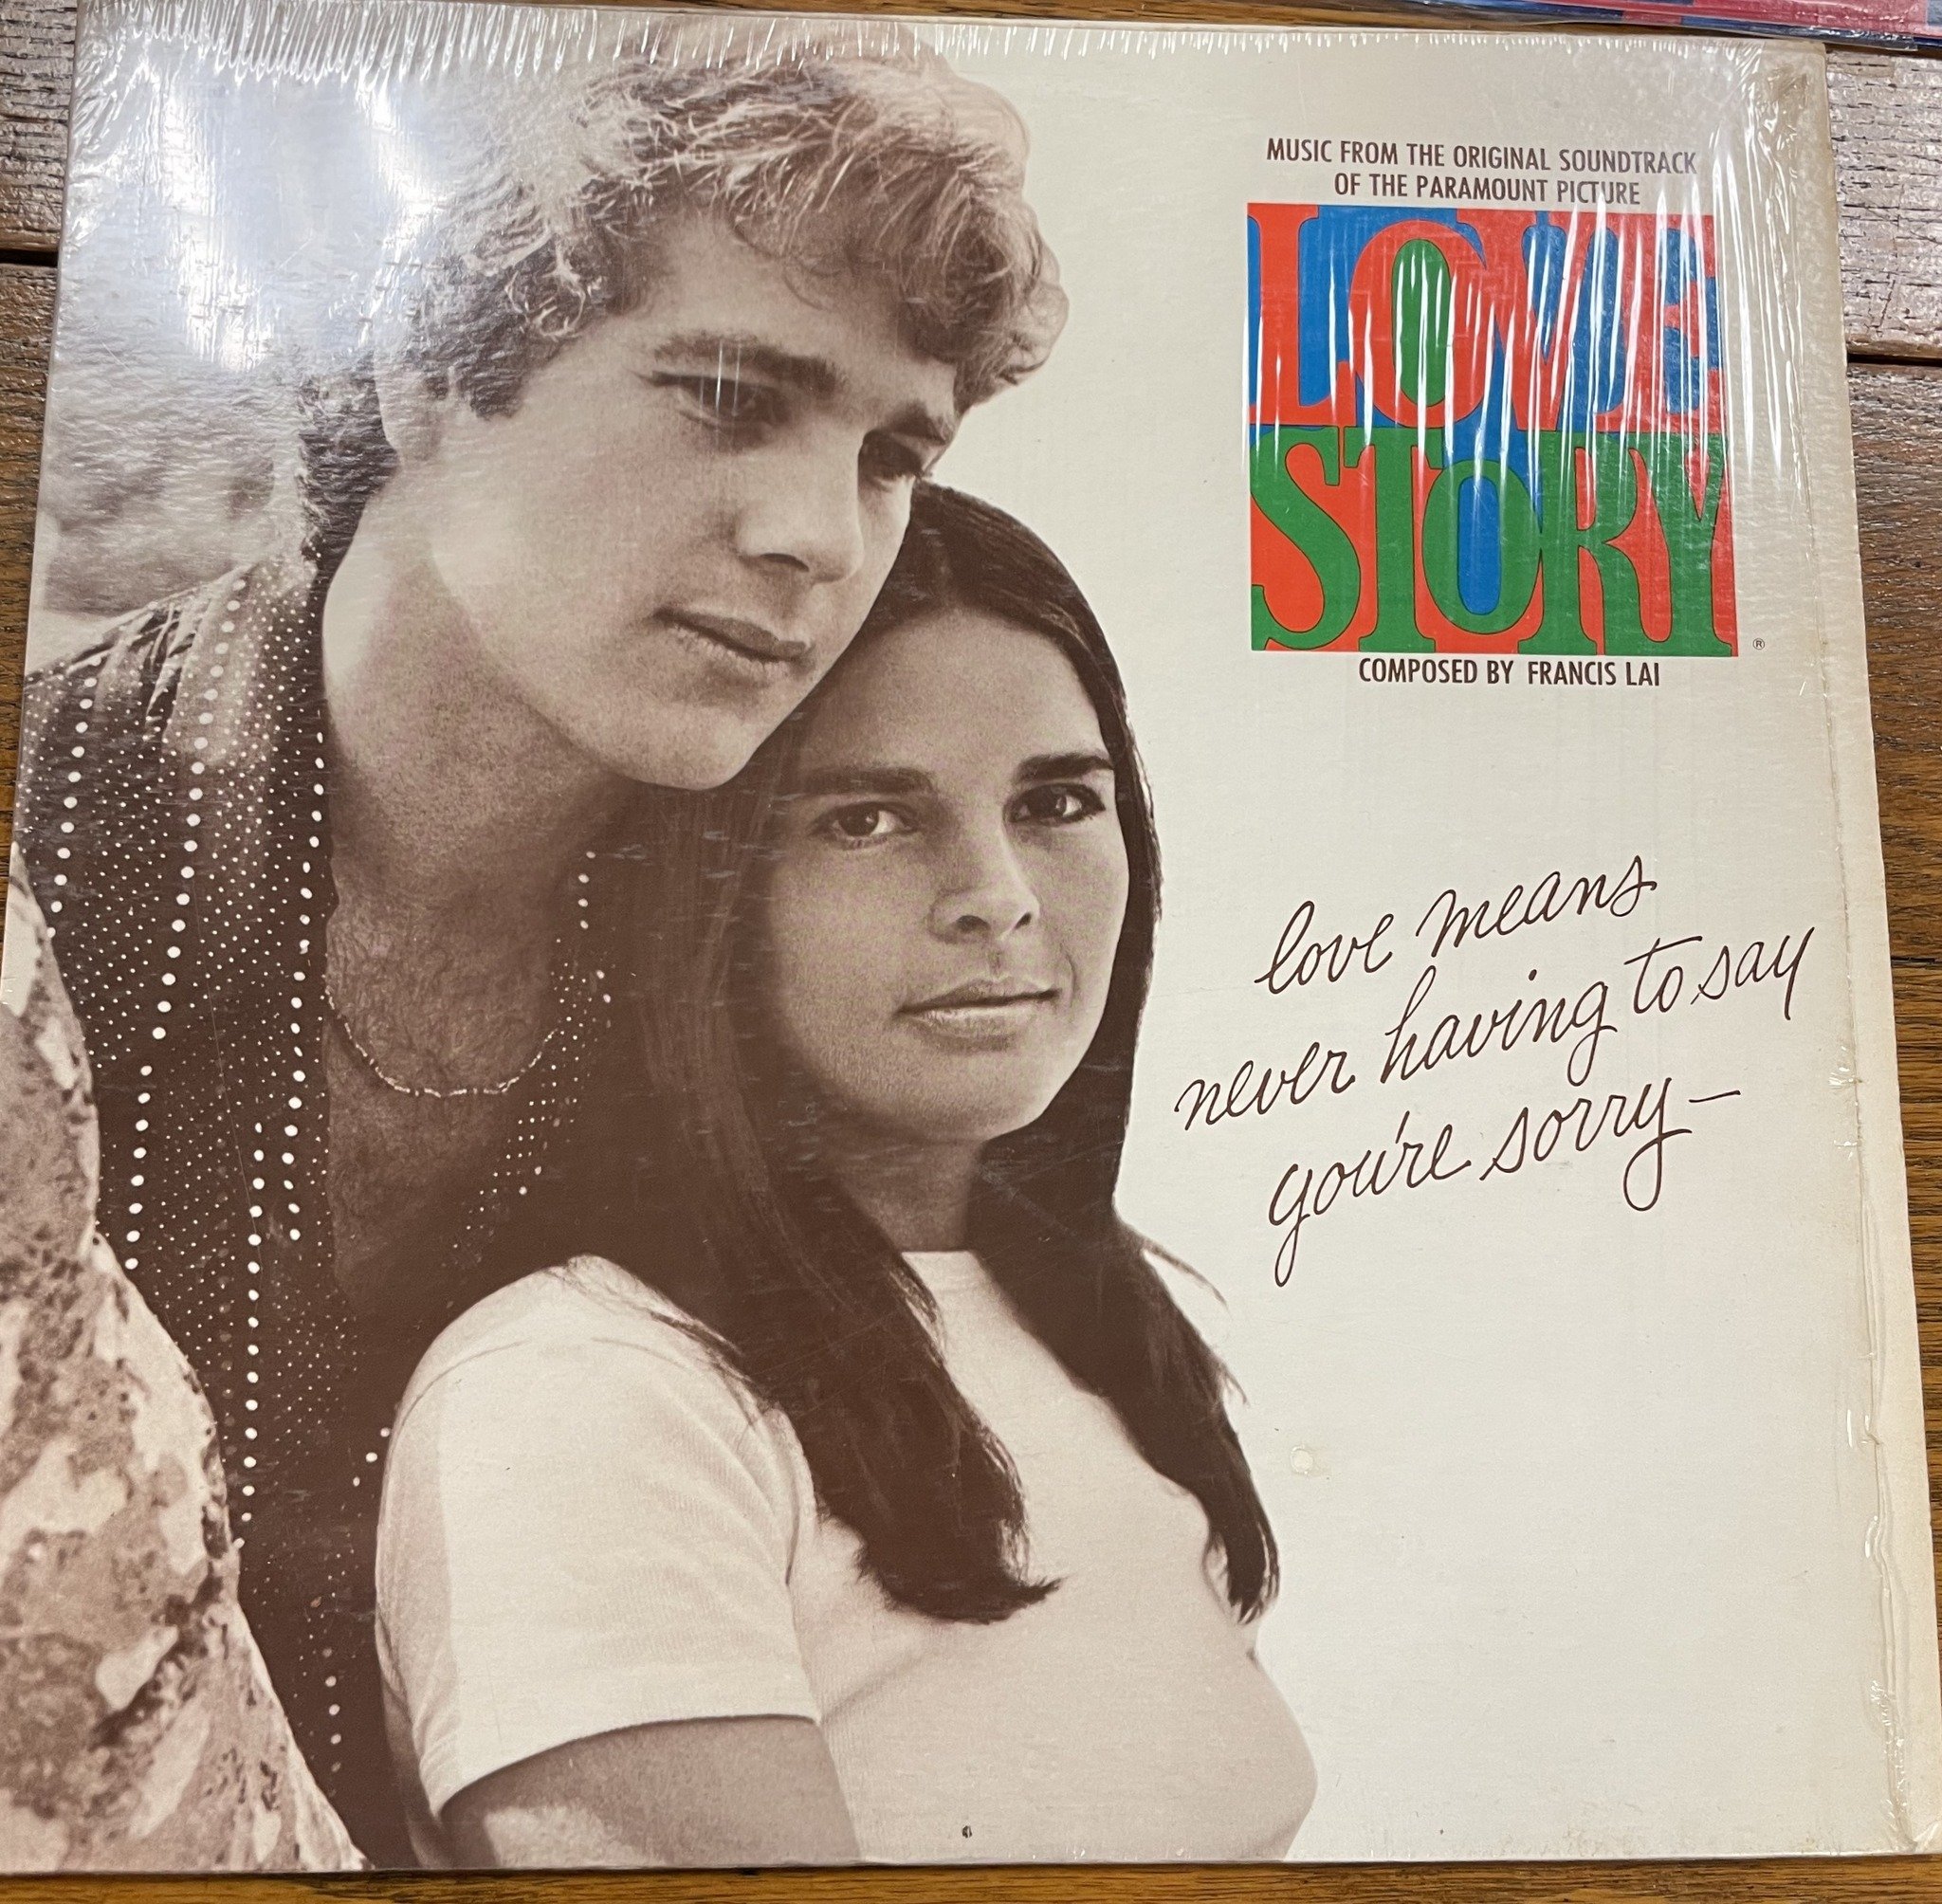 #musicmonday Love Story #heretodaymaybetomorrowmaybenot #antiques #decorandmore #vintage #rocantiques #roc #cdga #OMA #ontariomallantiques #vintageliving #vintage #collectibles #vintageny #antiquesnewyork
#rocantiques #vinyl #recordalbums